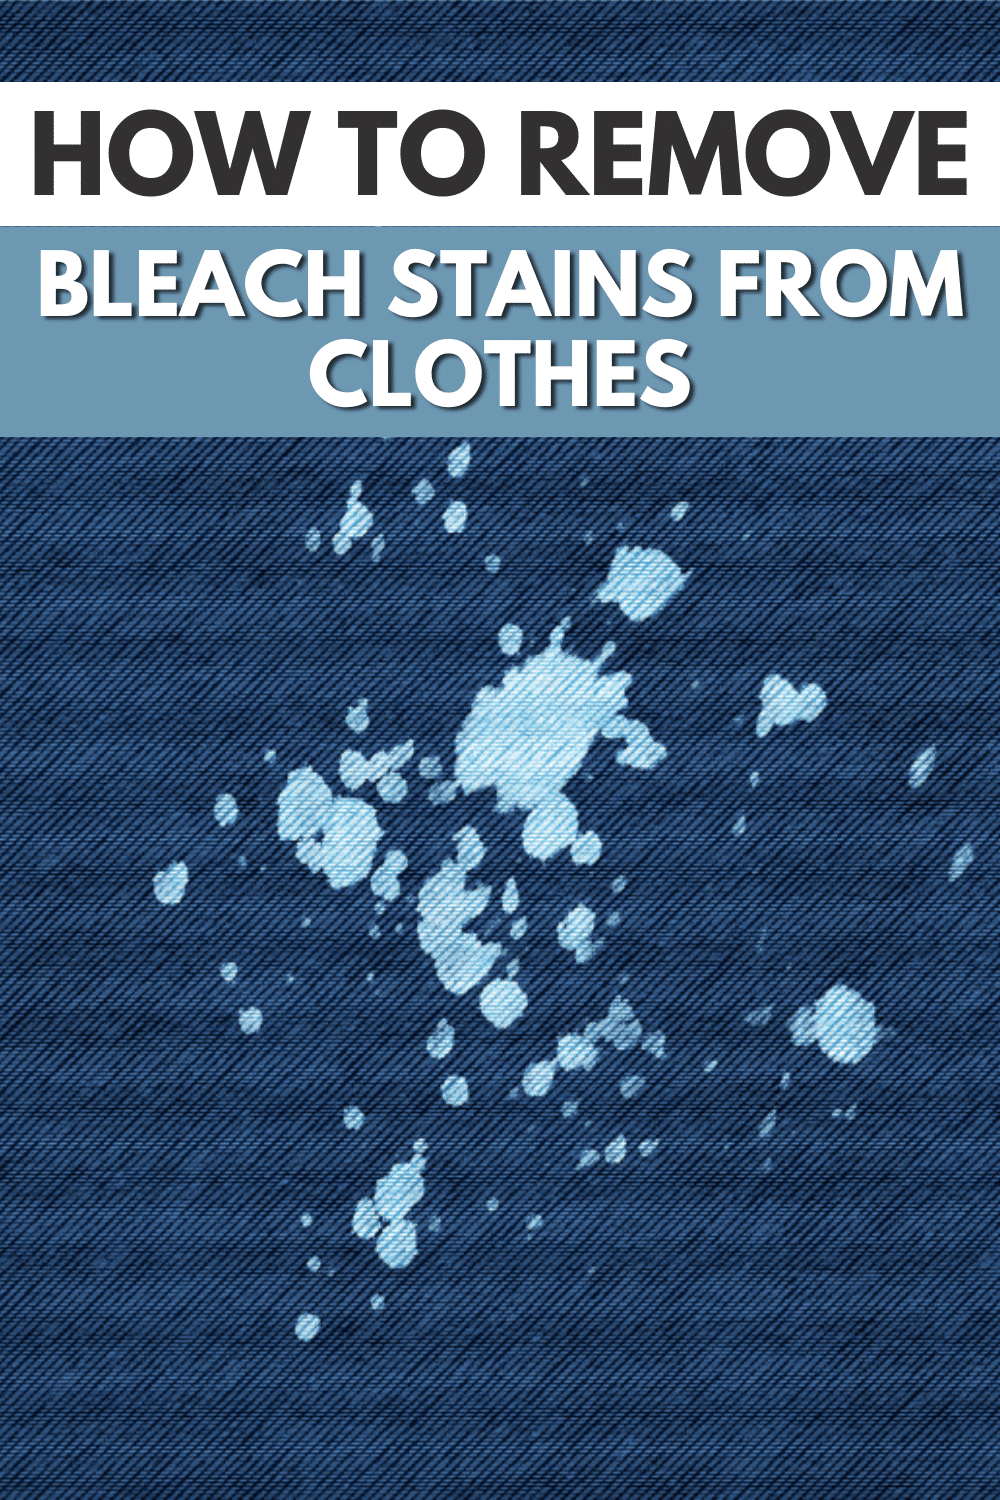 Guide to removing bleach stains from clothes.